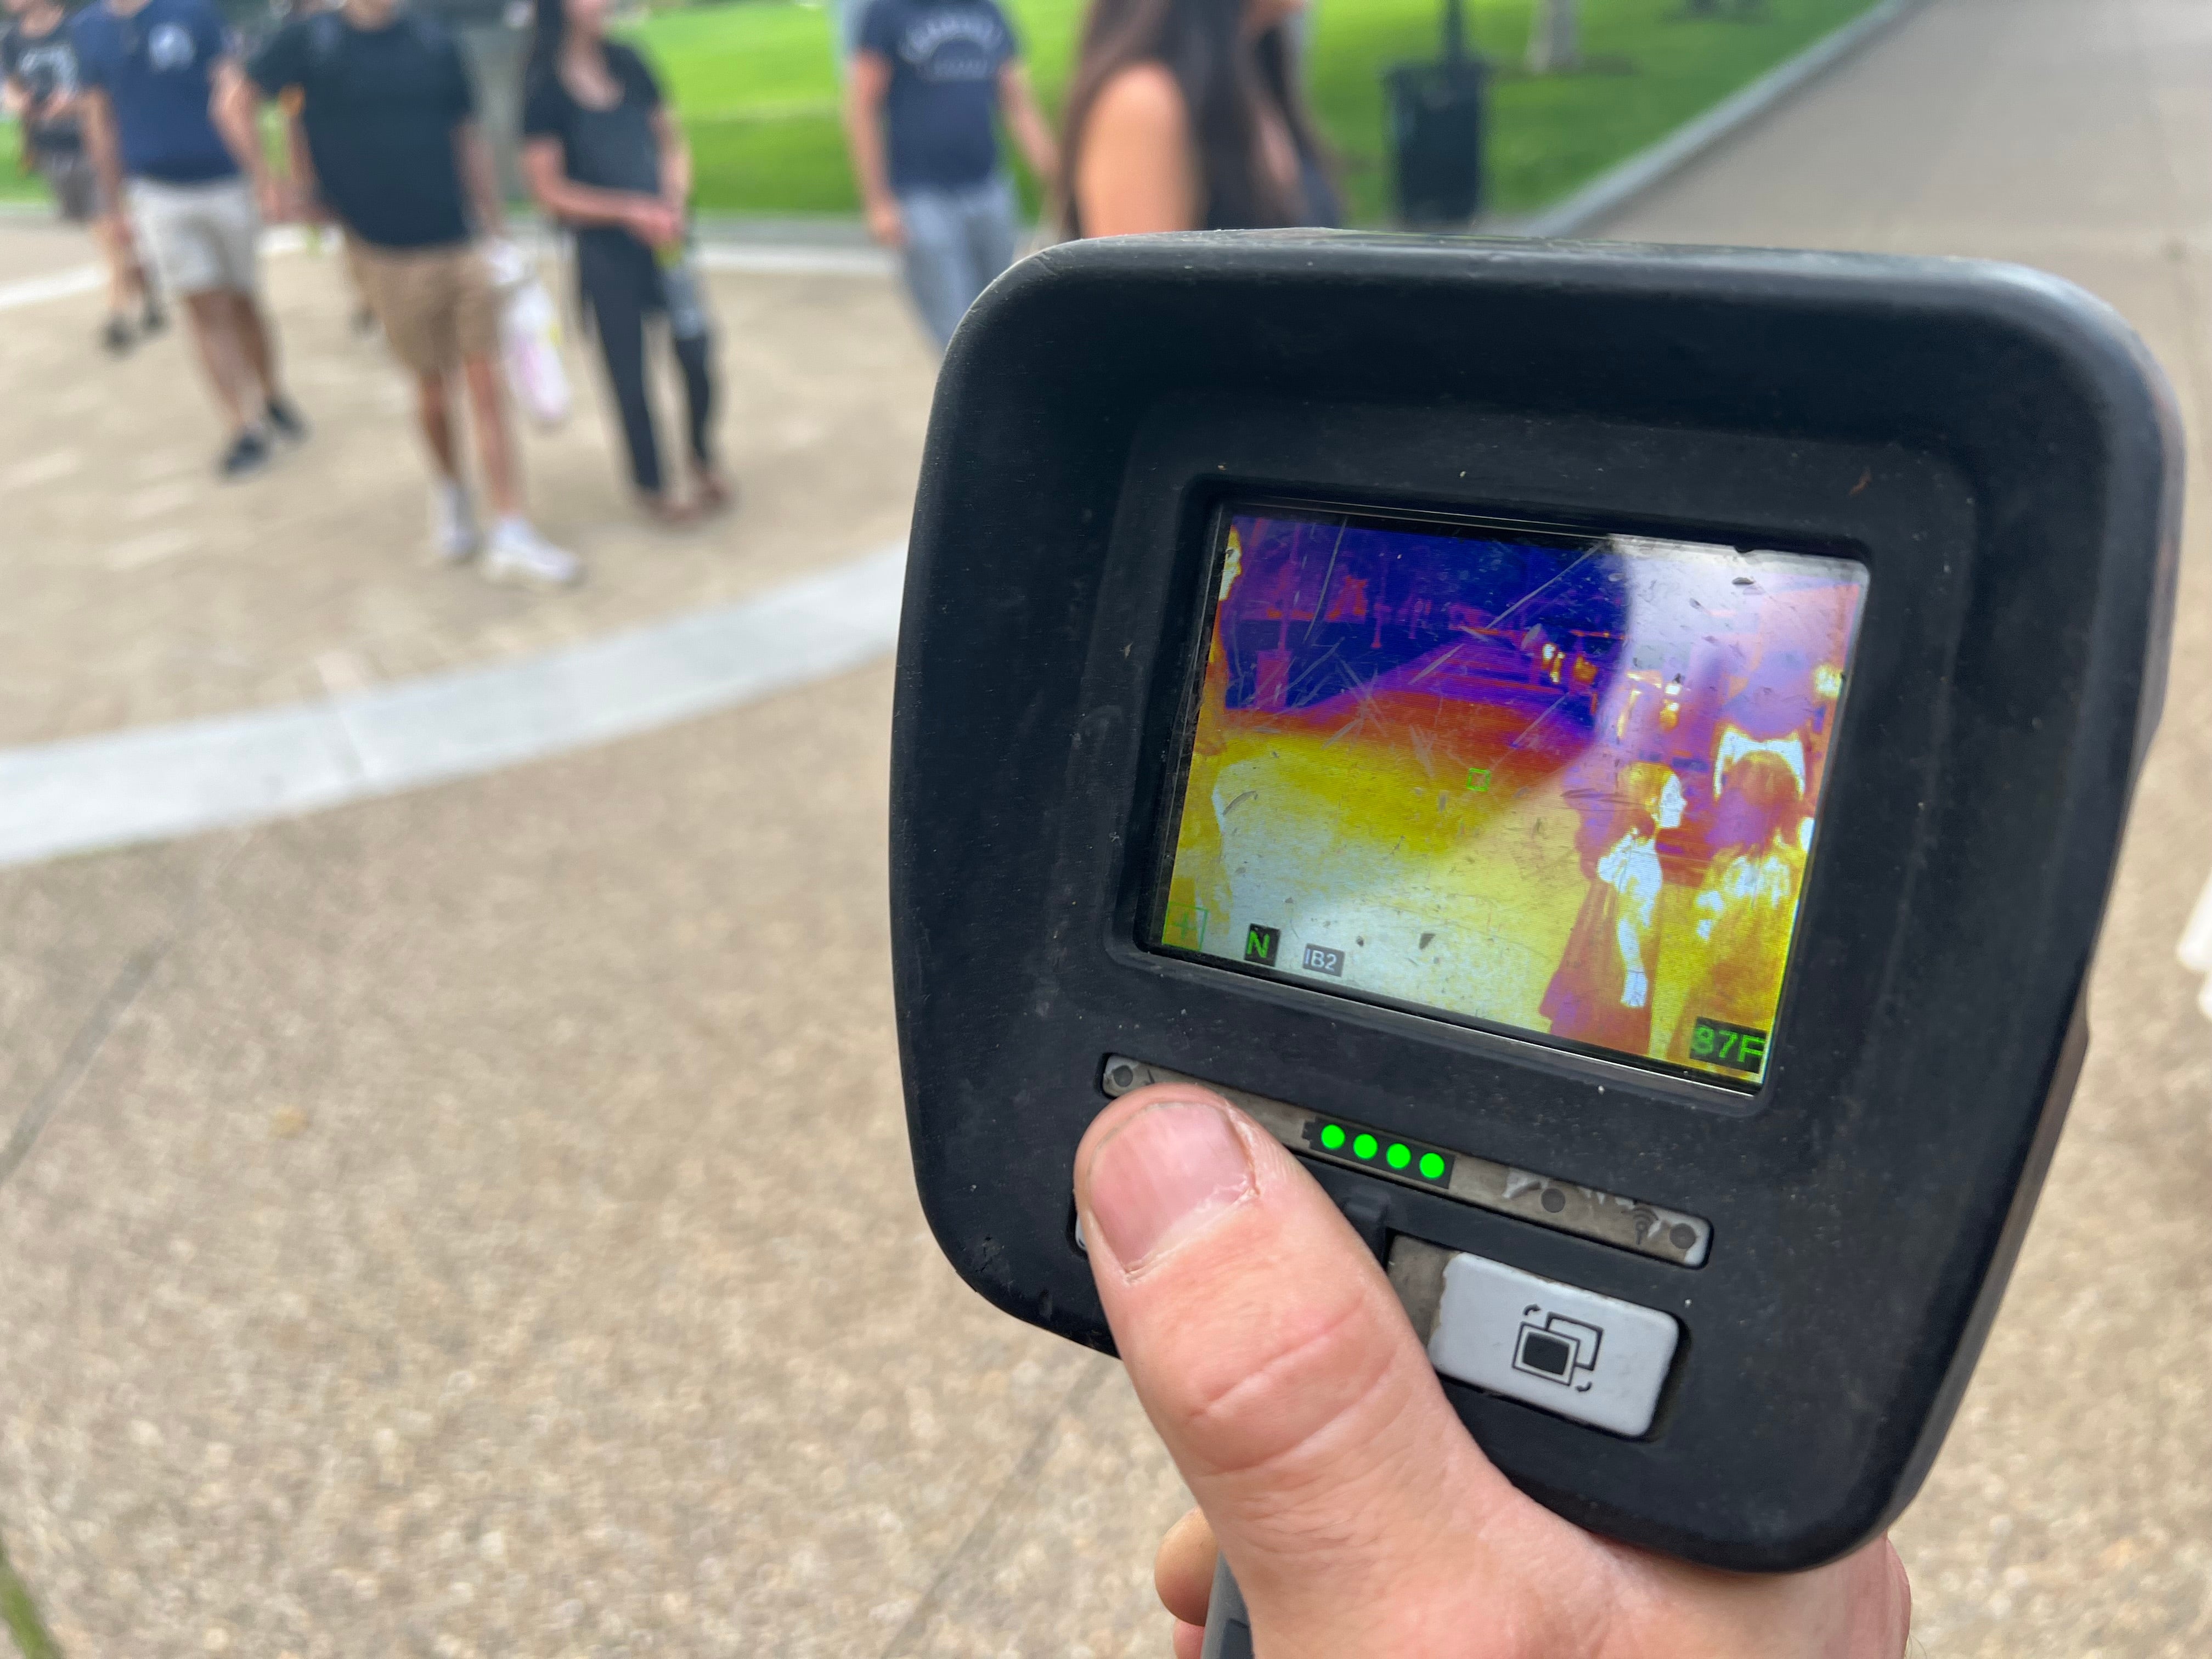 A firefighter demonstrates a thermal imager during National Night Out.